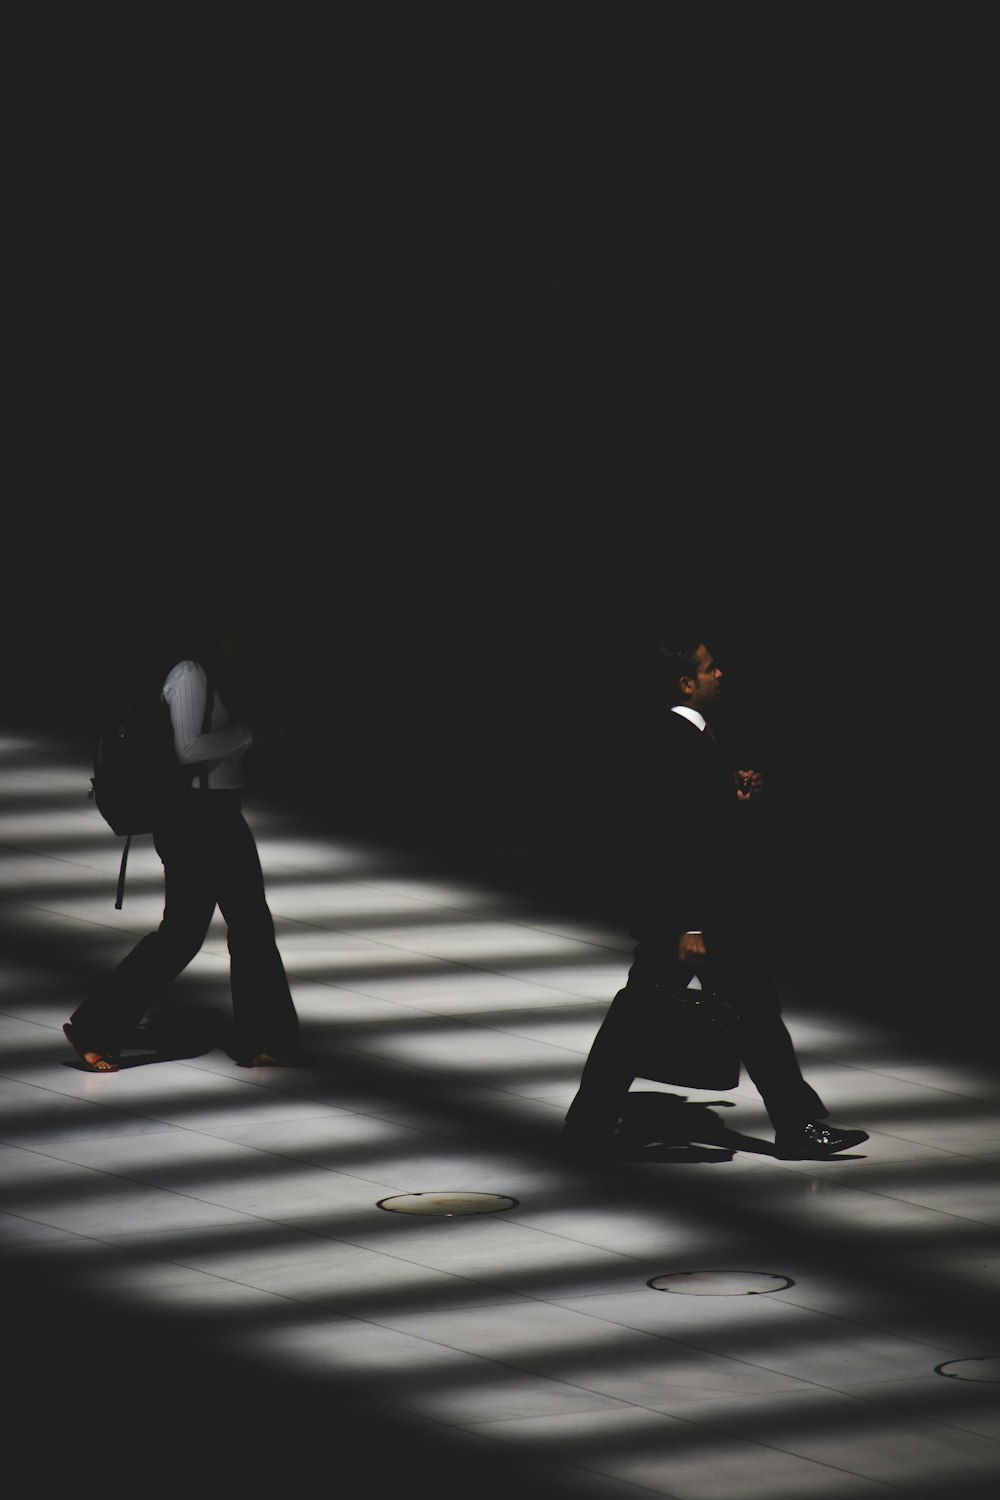 two person walking inside building with black lighting